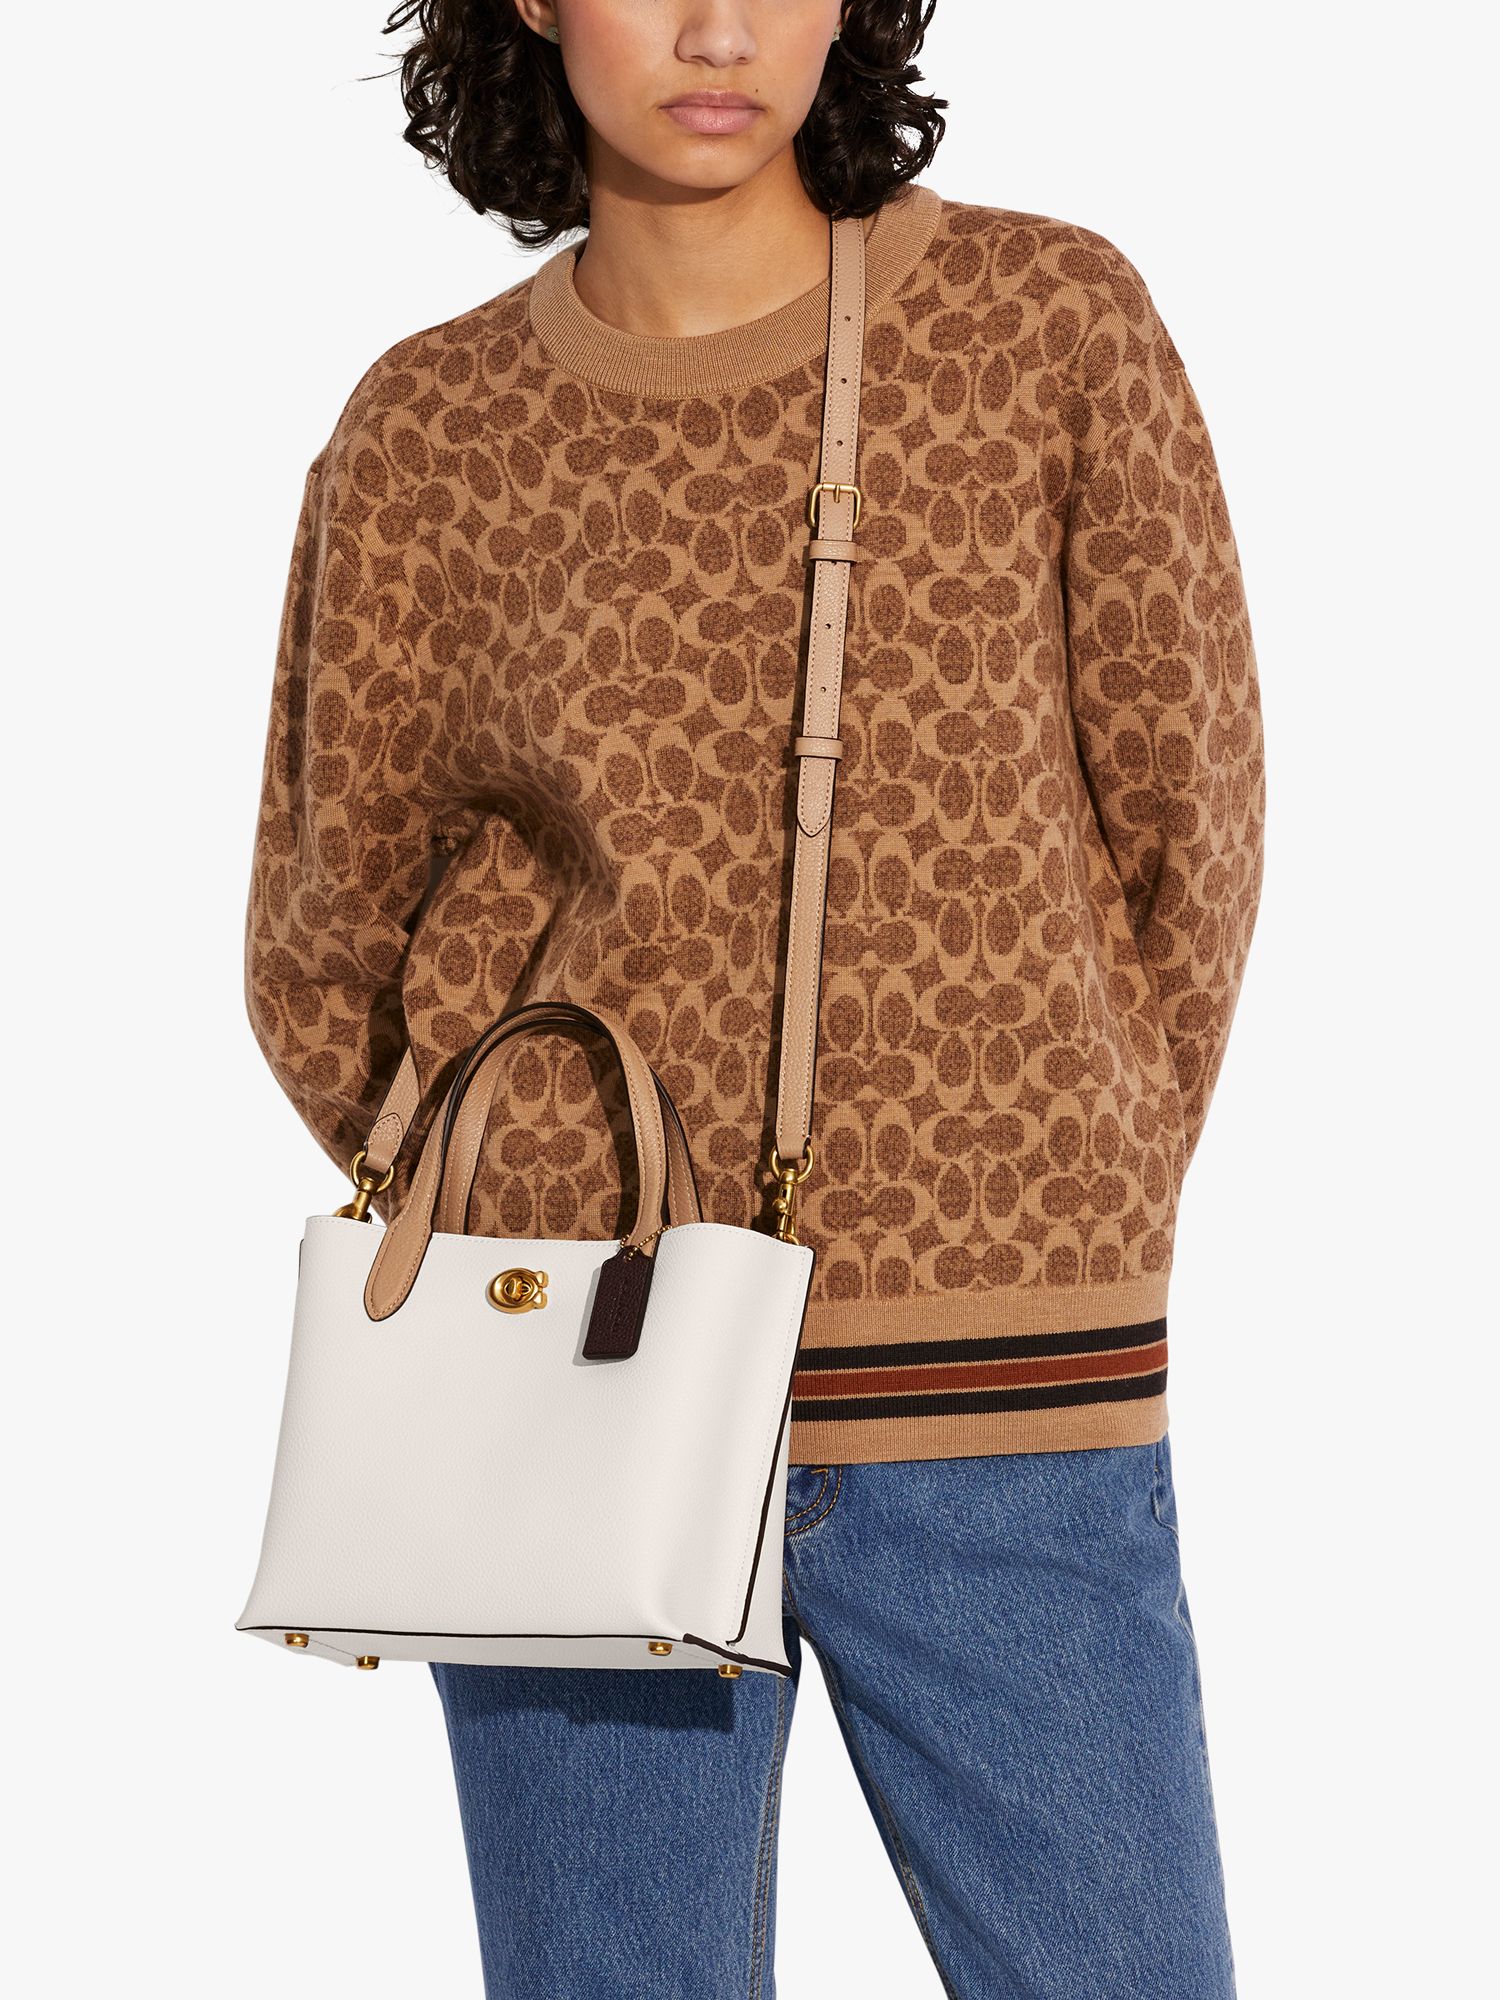 Printed Brown Coach stylish bags